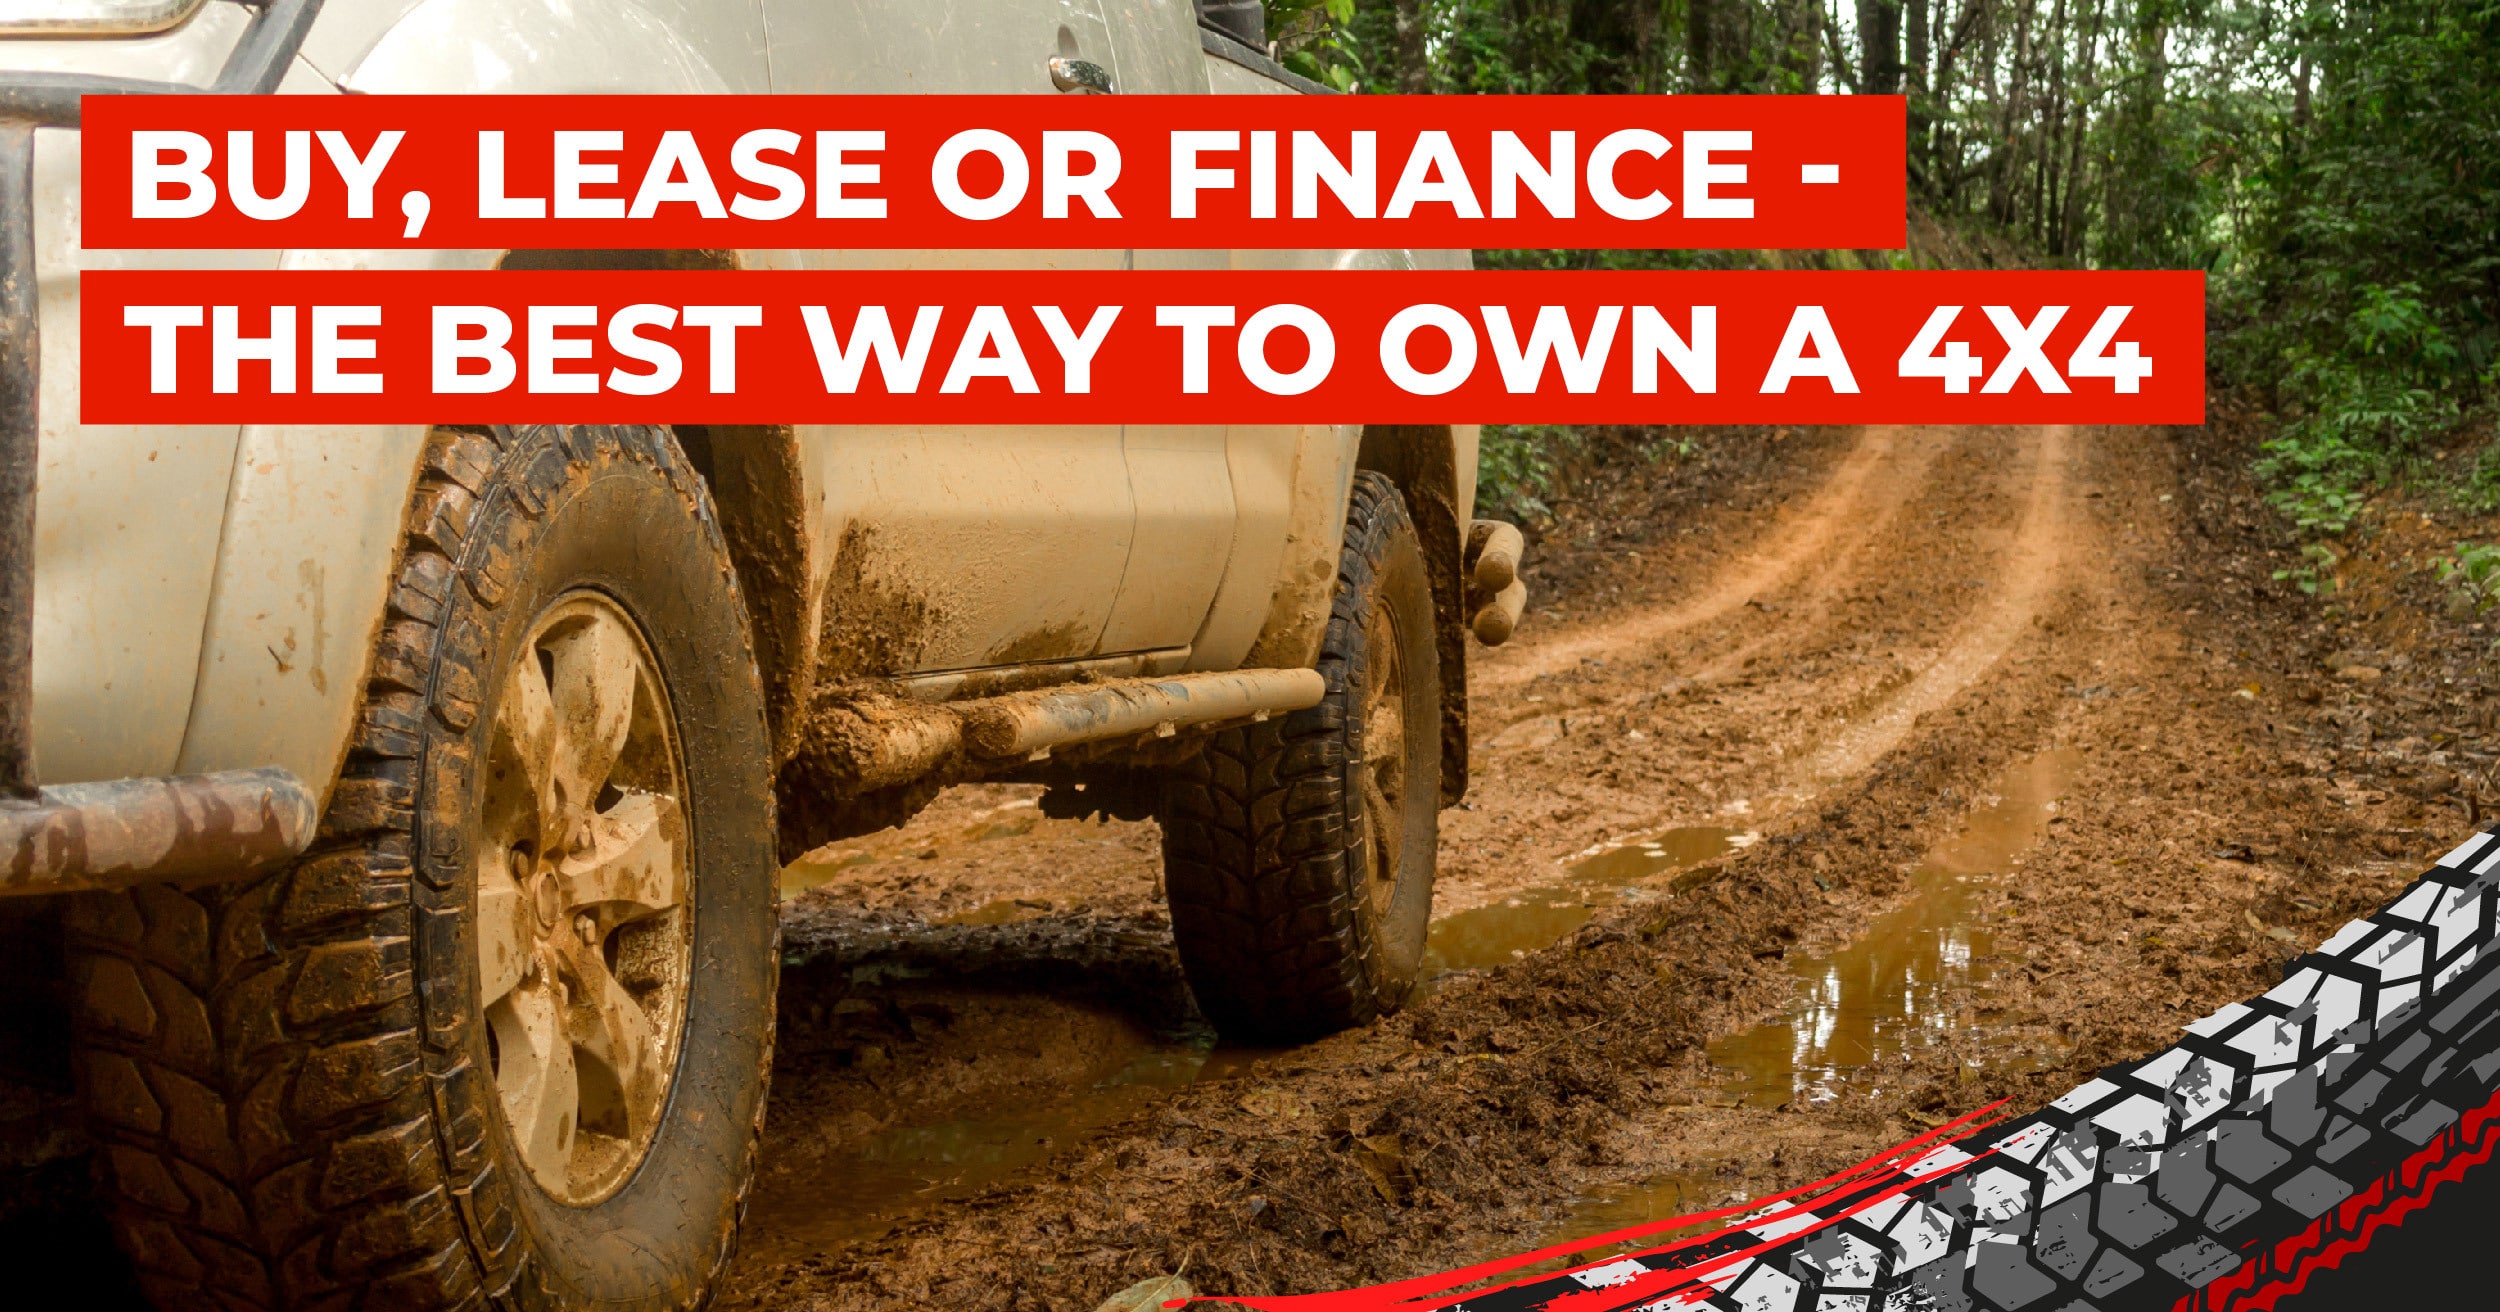 Buy, Lease or Finance: The Best Way To Own a 4x4